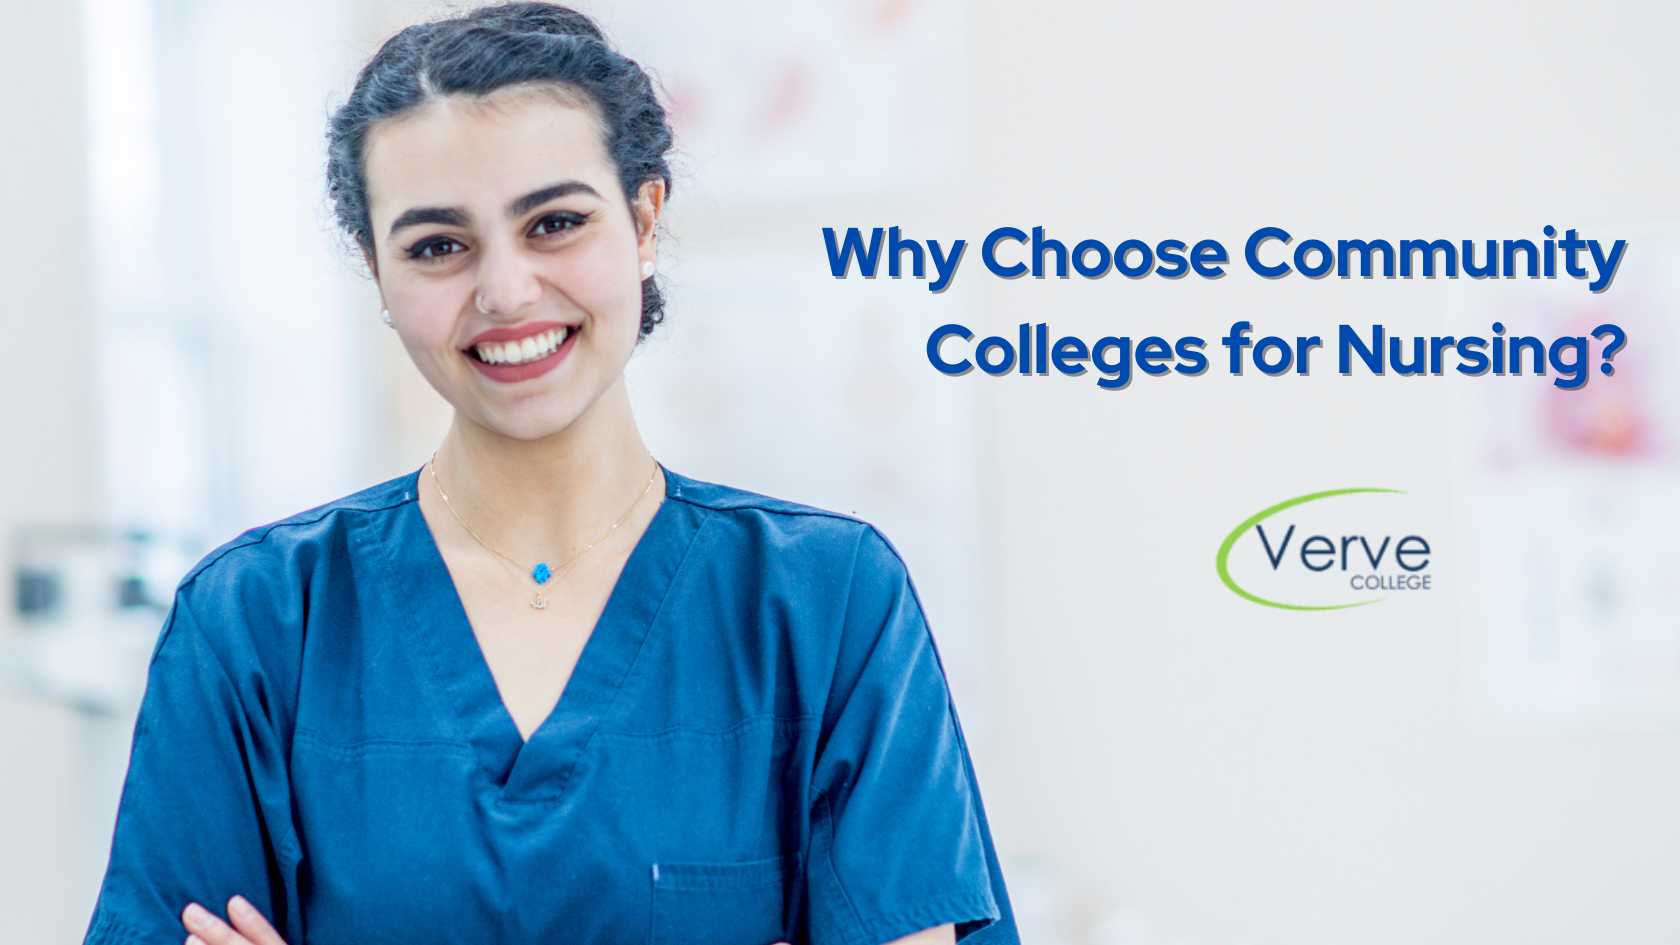 Why Choose Community Colleges for Nursing: Benefits and Opportunities?